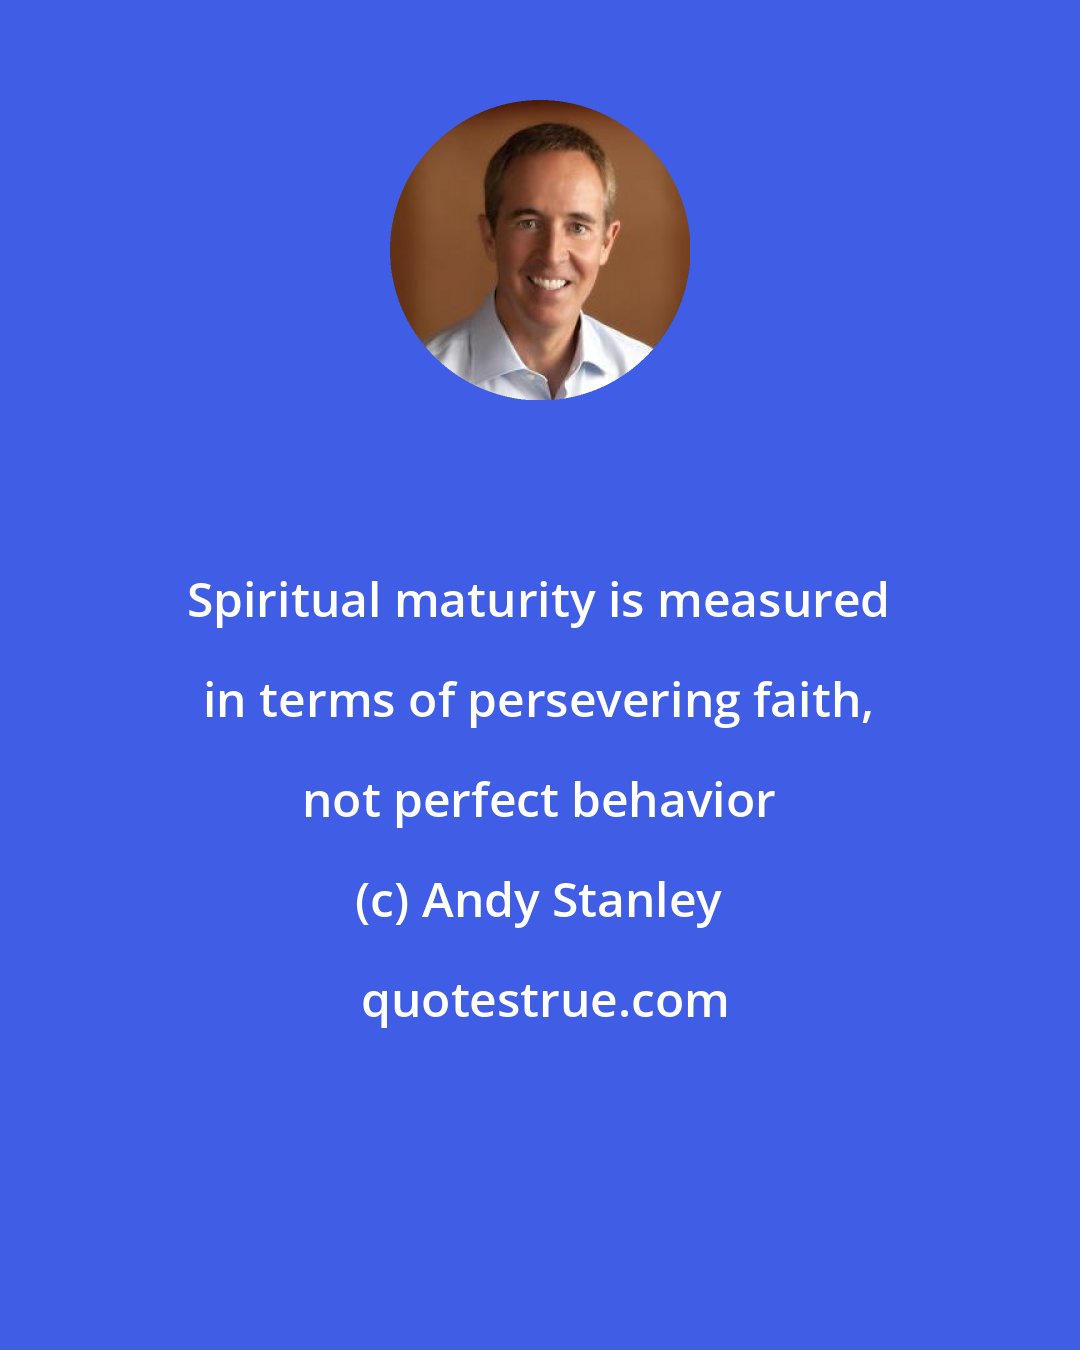 Andy Stanley: Spiritual maturity is measured in terms of persevering faith, not perfect behavior